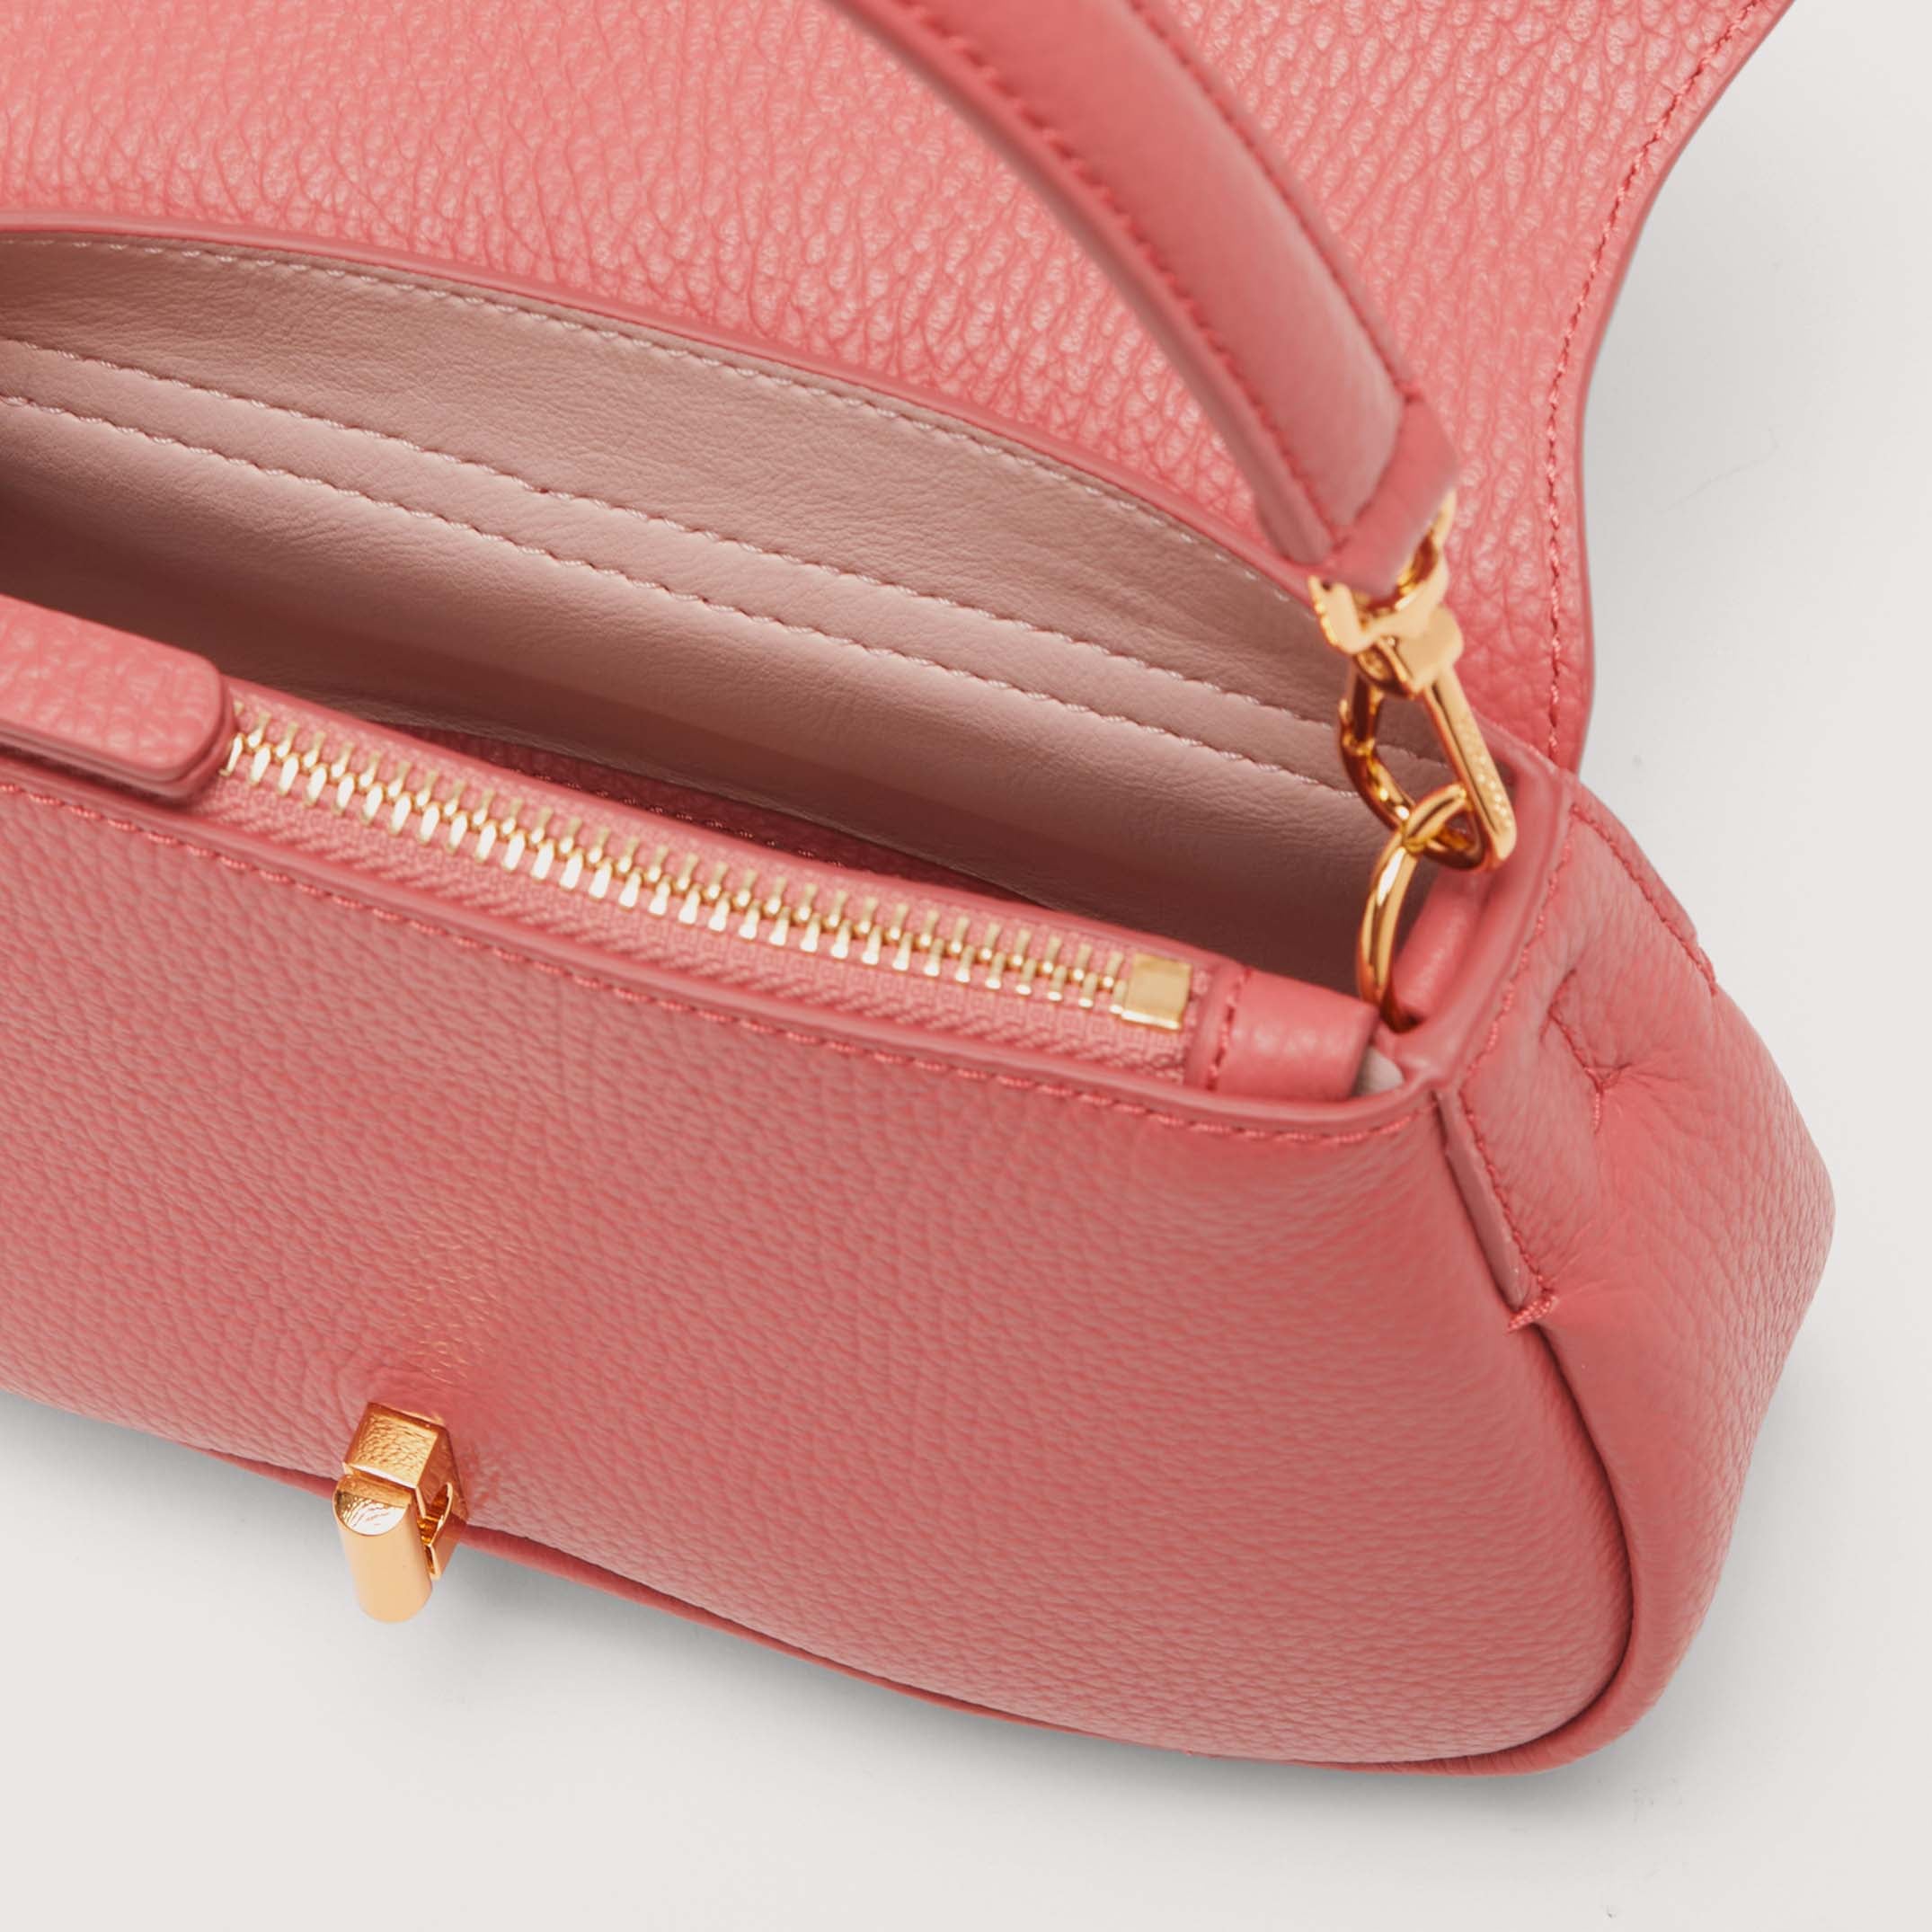 Coccinelle Himma Small Shoulder Bag